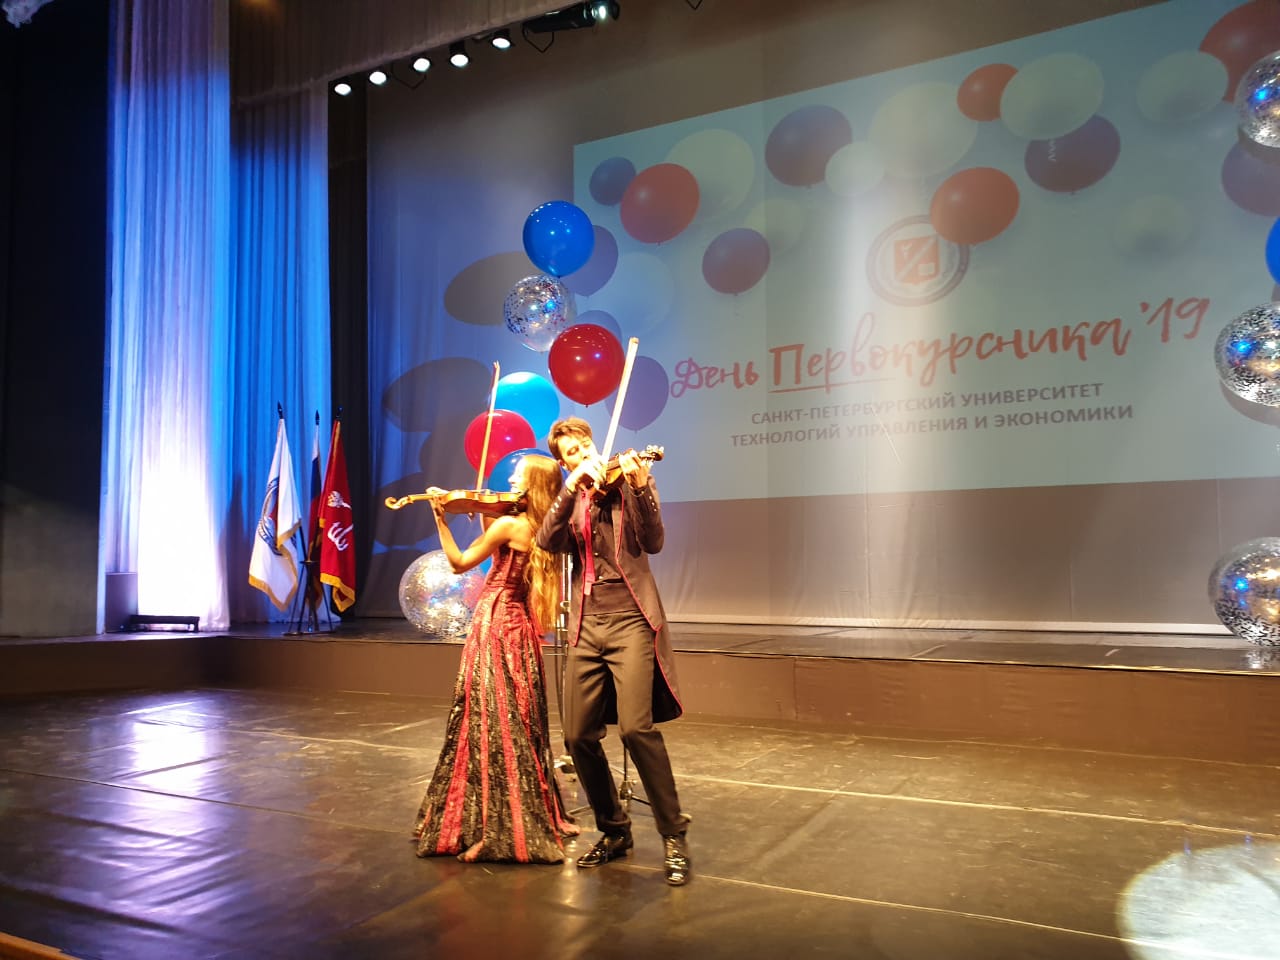 The first-year students received greetings in the Anichkov Palace